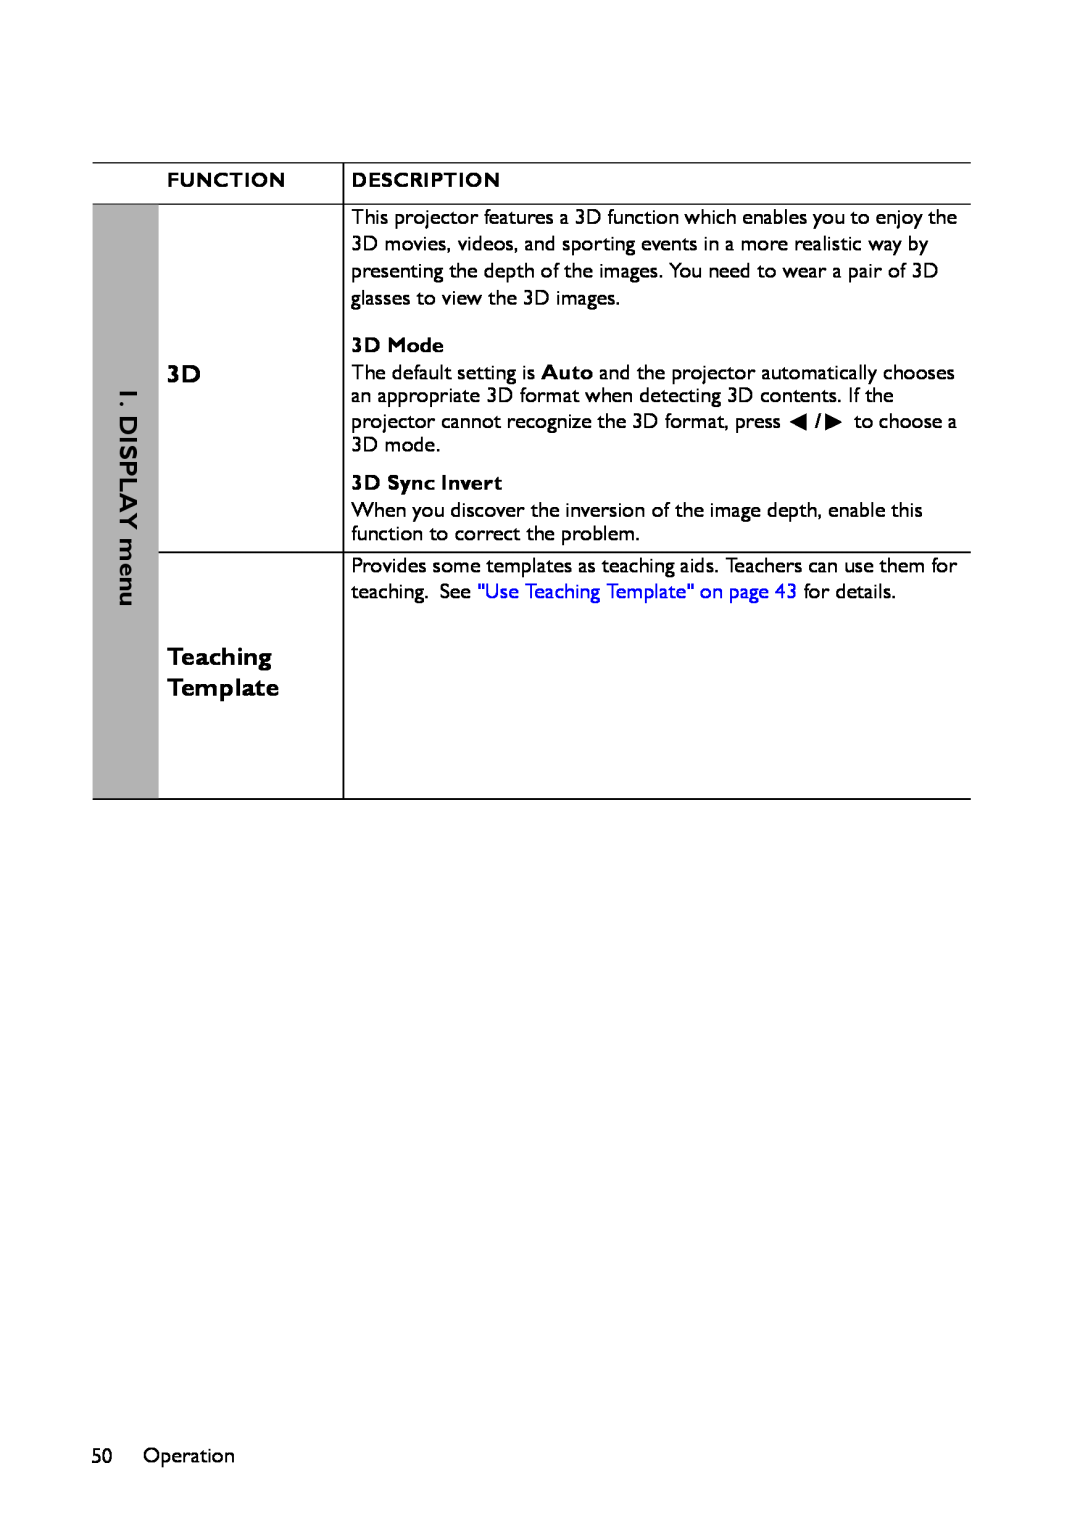 BenQ MS517 user manual teaching. See Use Teaching Template on page 43 for details 